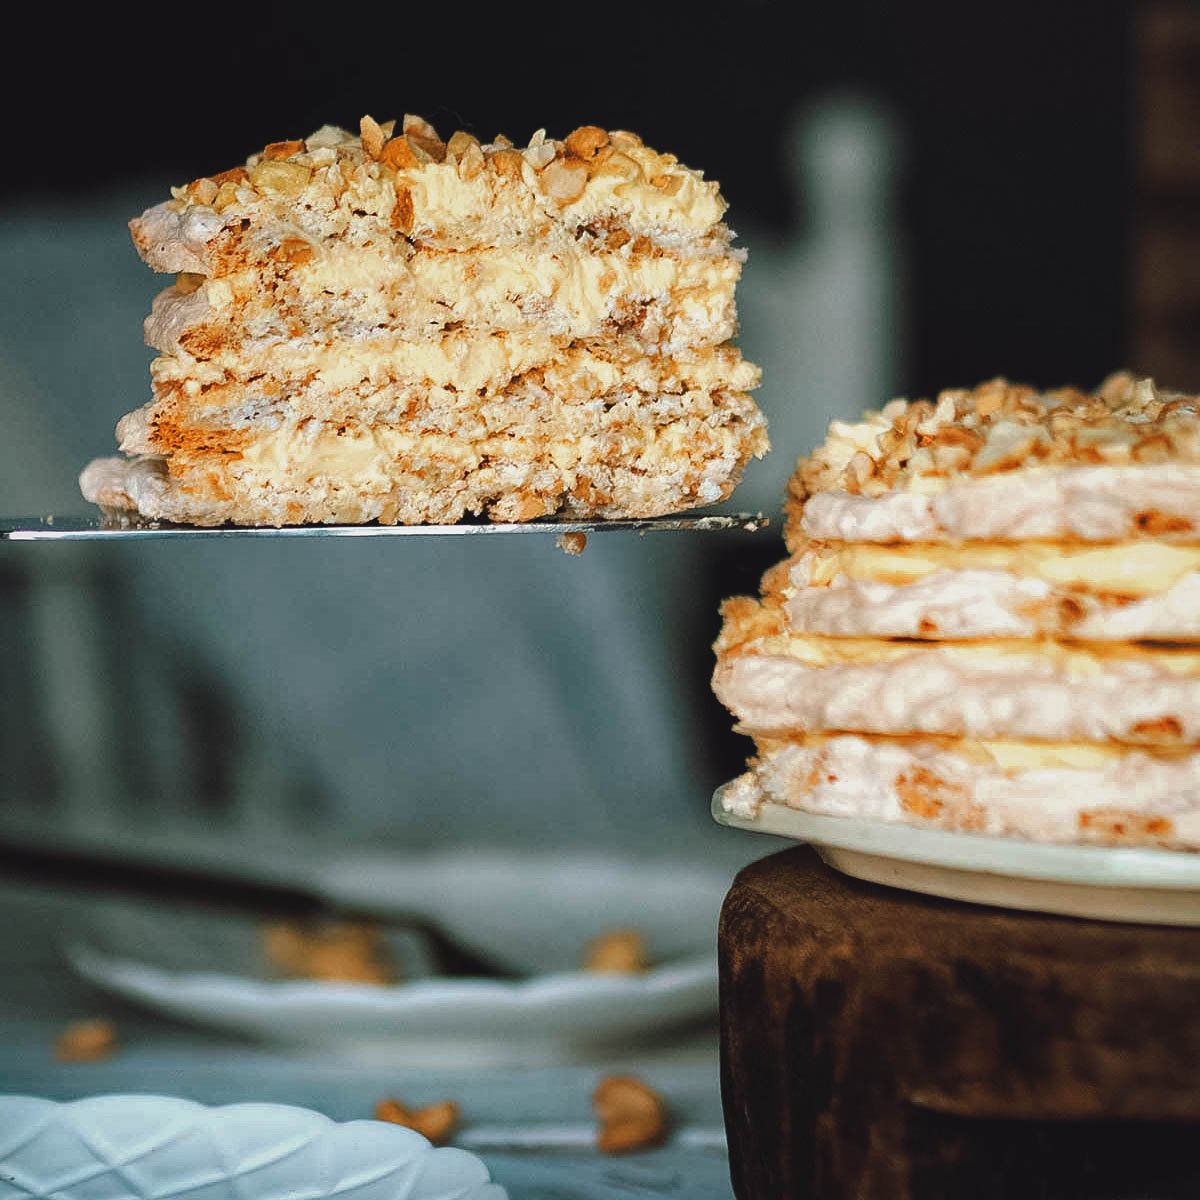 Sans rival, a unique dessert made with cashews and buttercream